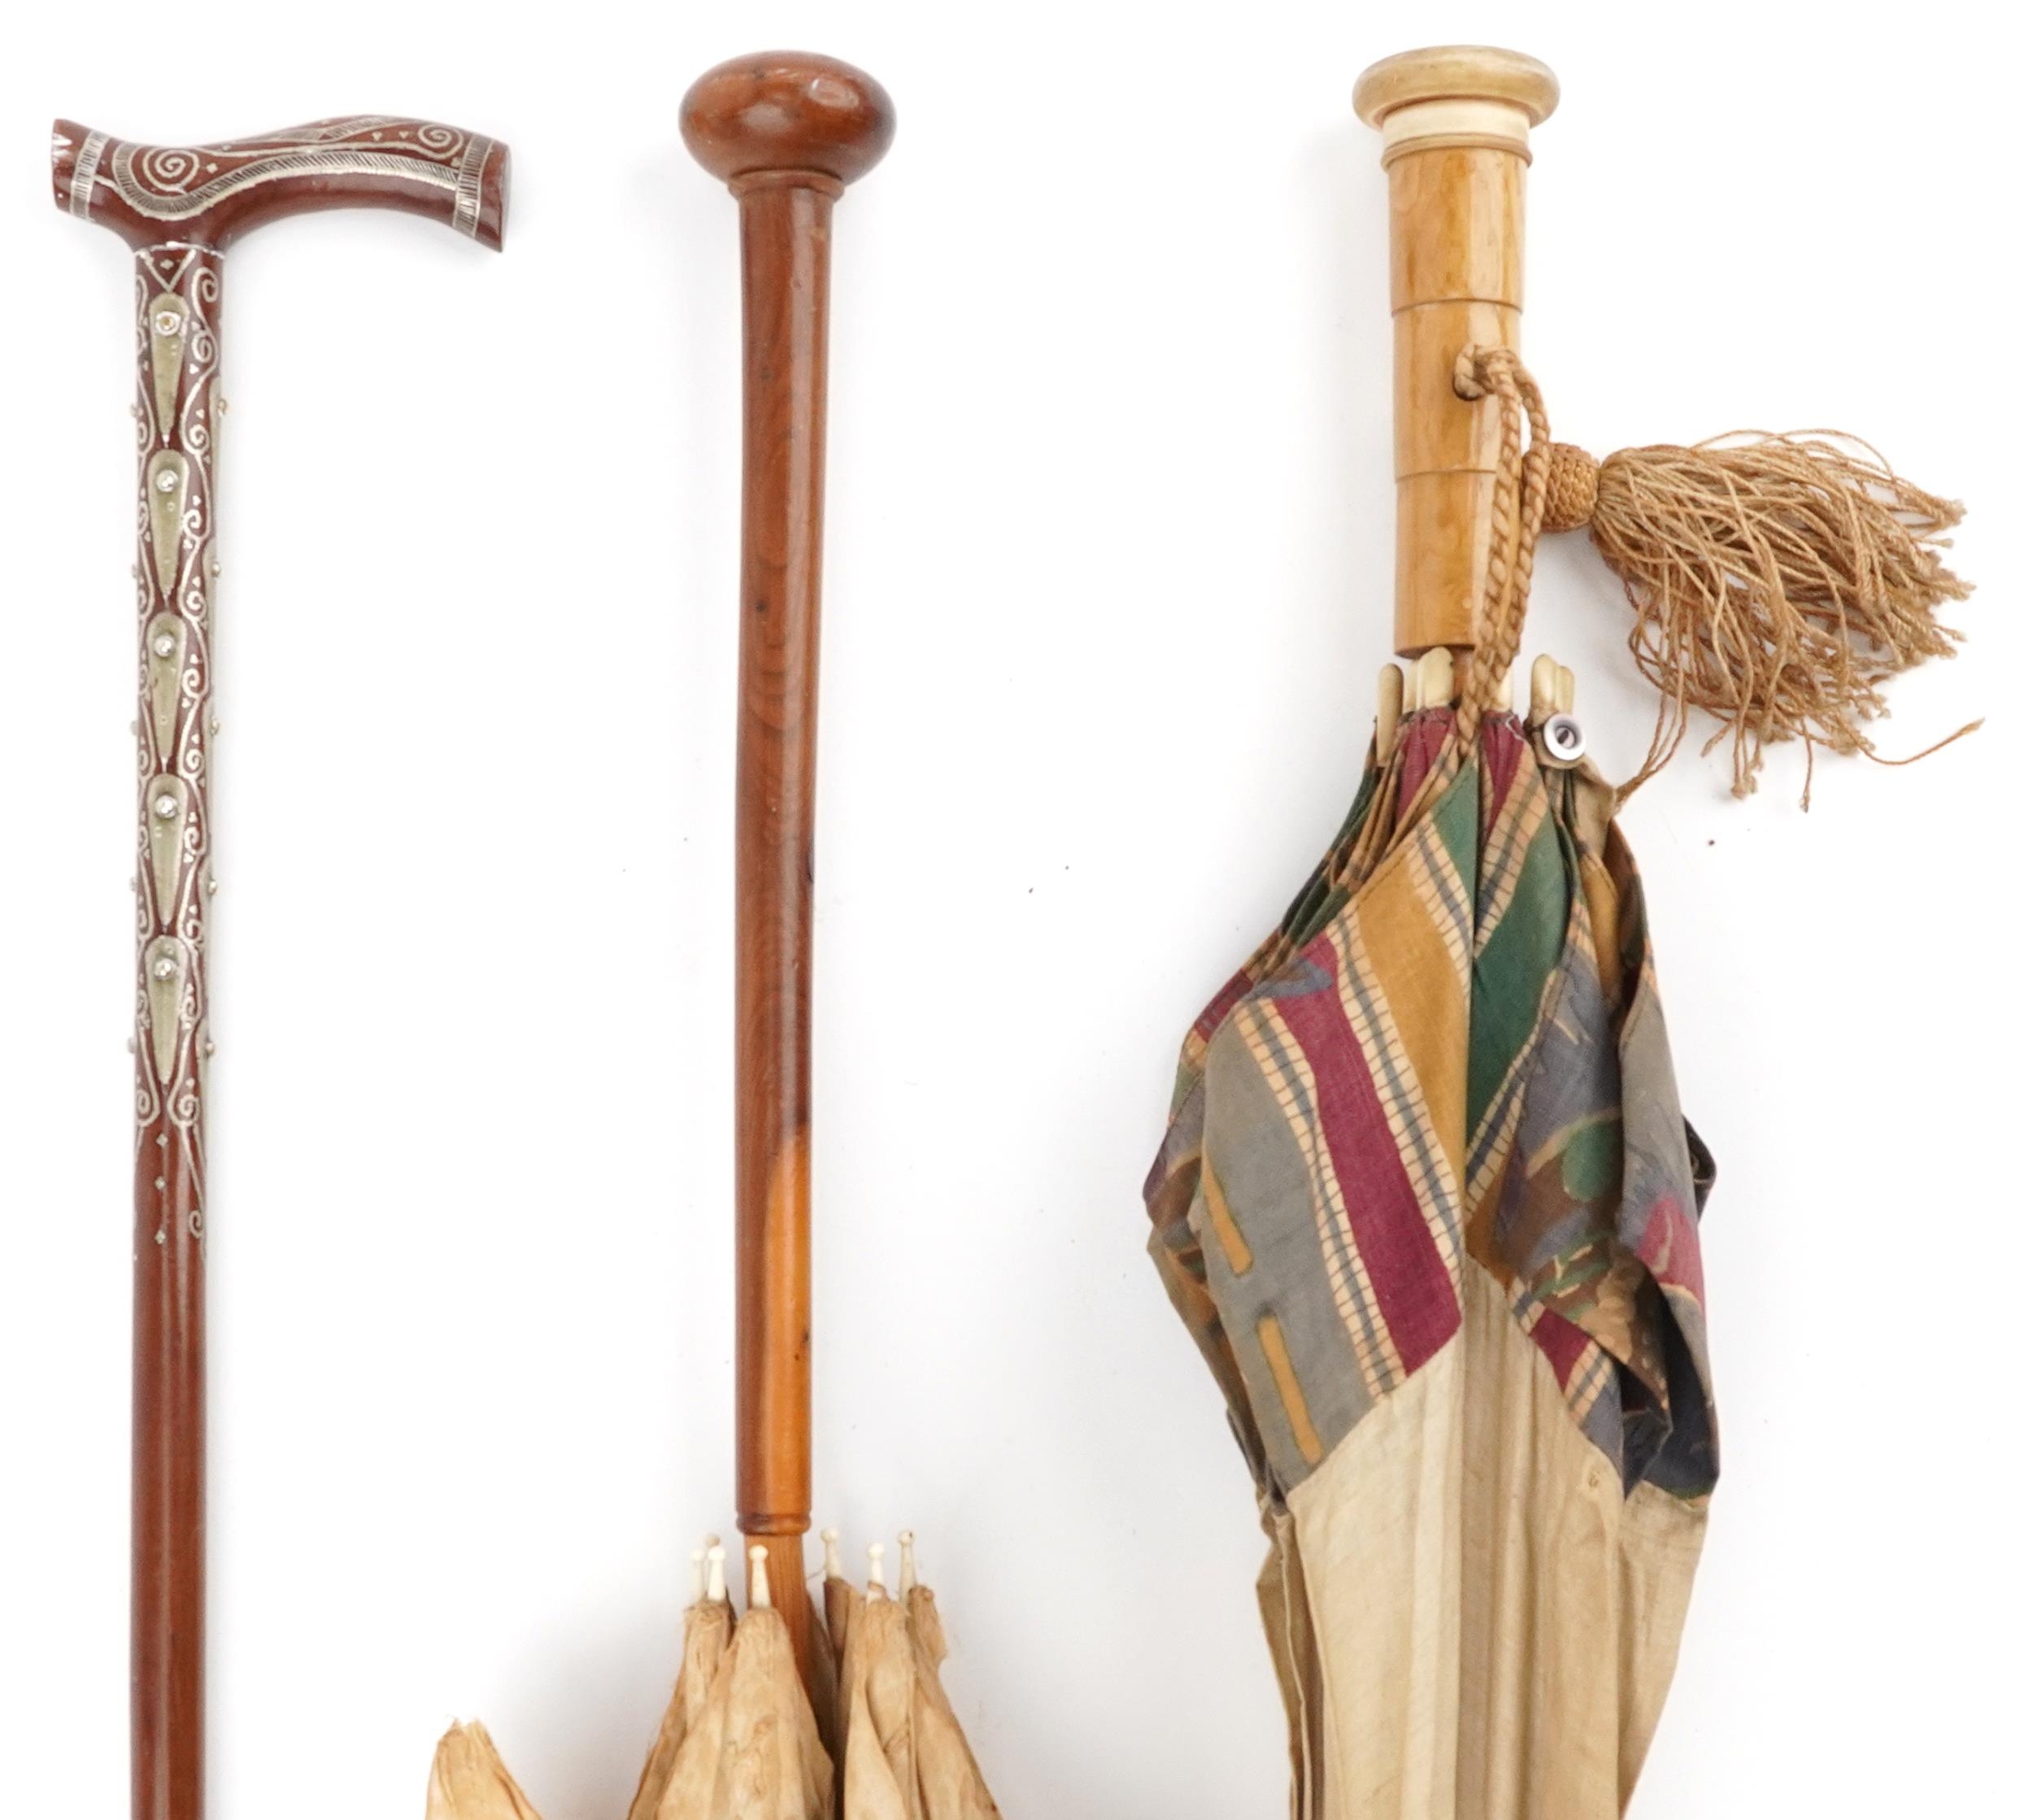 Two early 20th century parasols and a Middle Eastern hardwood walking stick with foliate metal